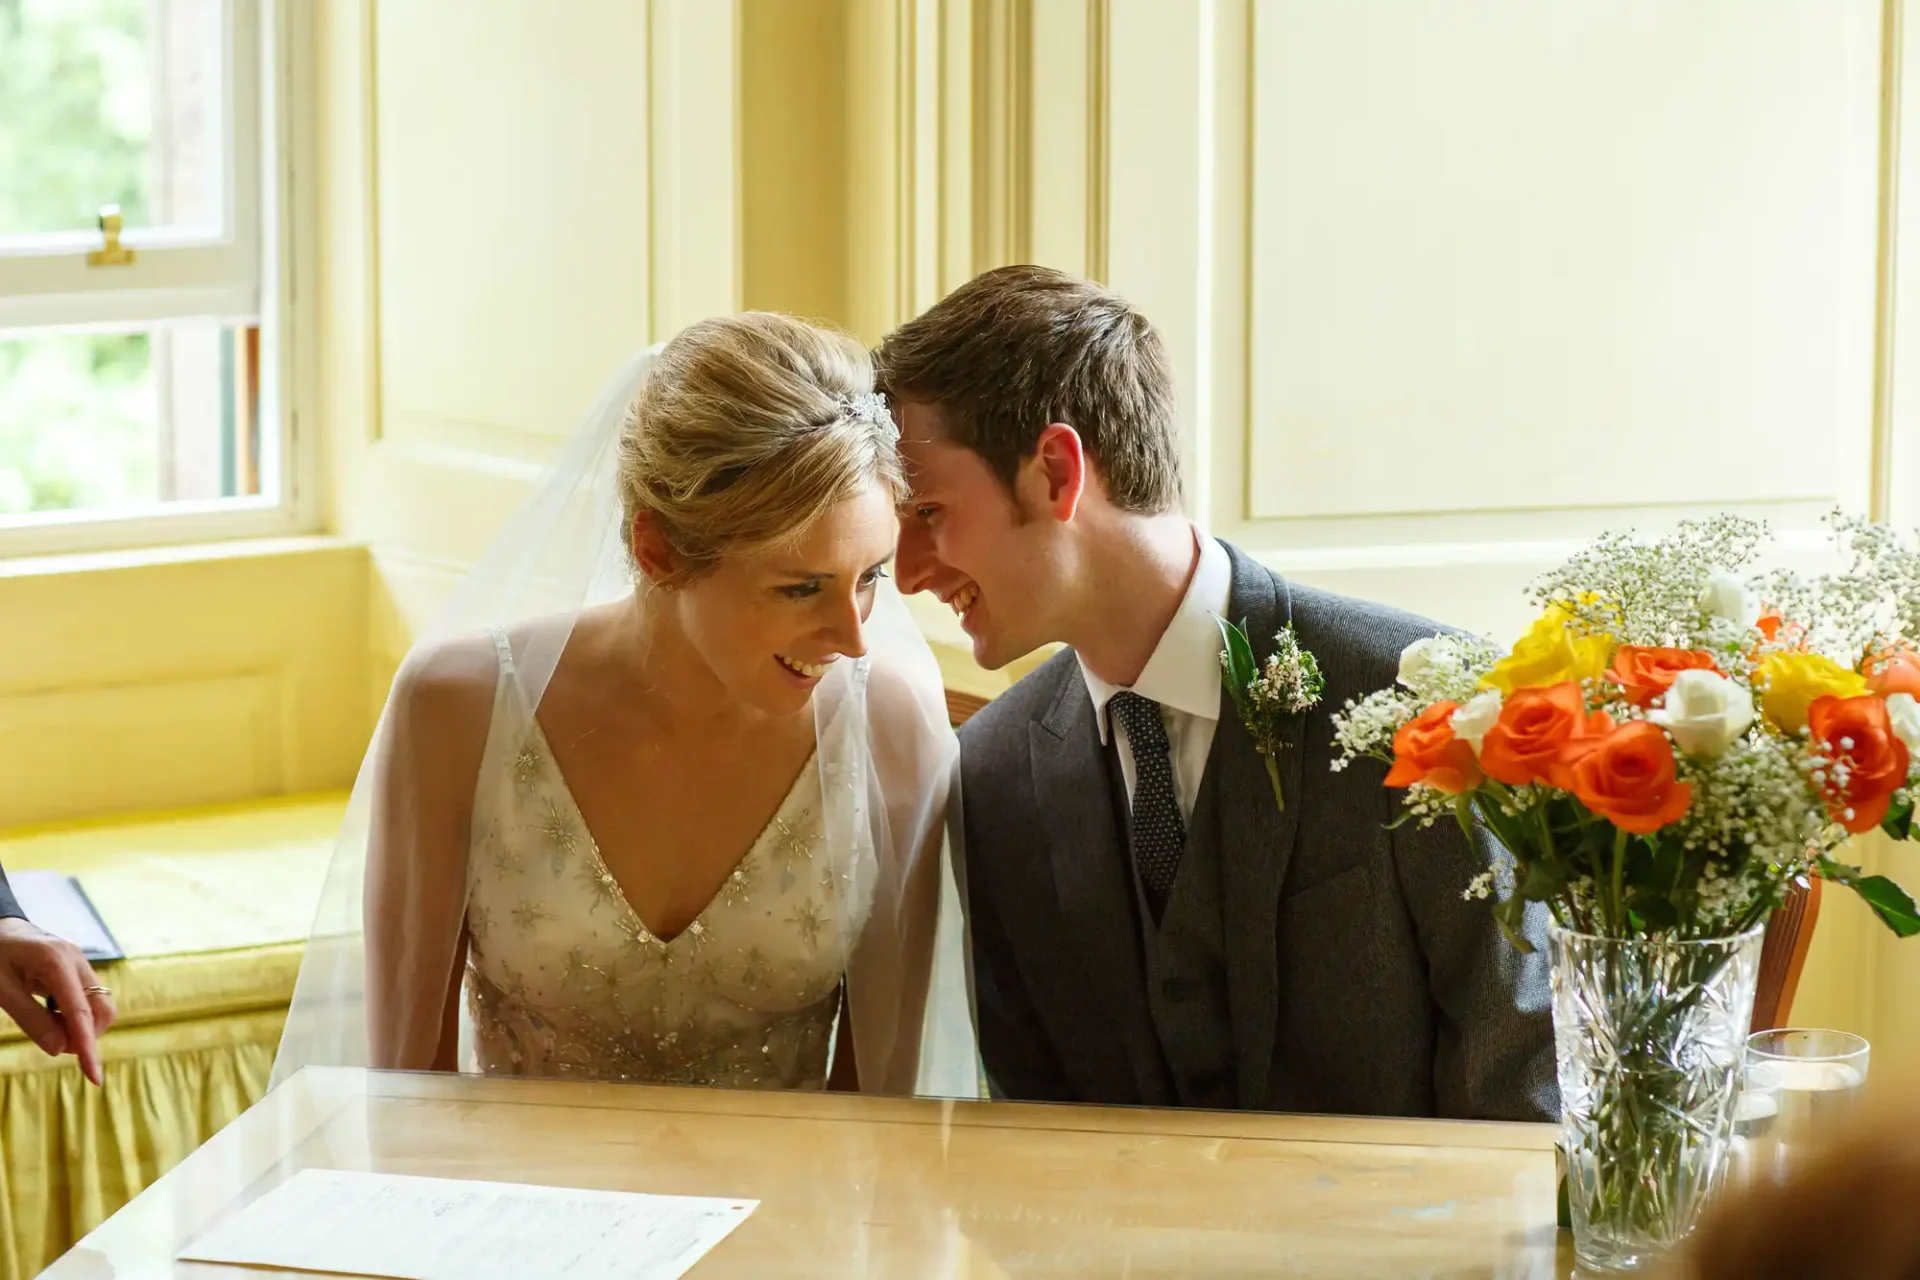 A bride and groom smiling at each other during their wedding ceremony, with a bouquet of flowers in the foreground.